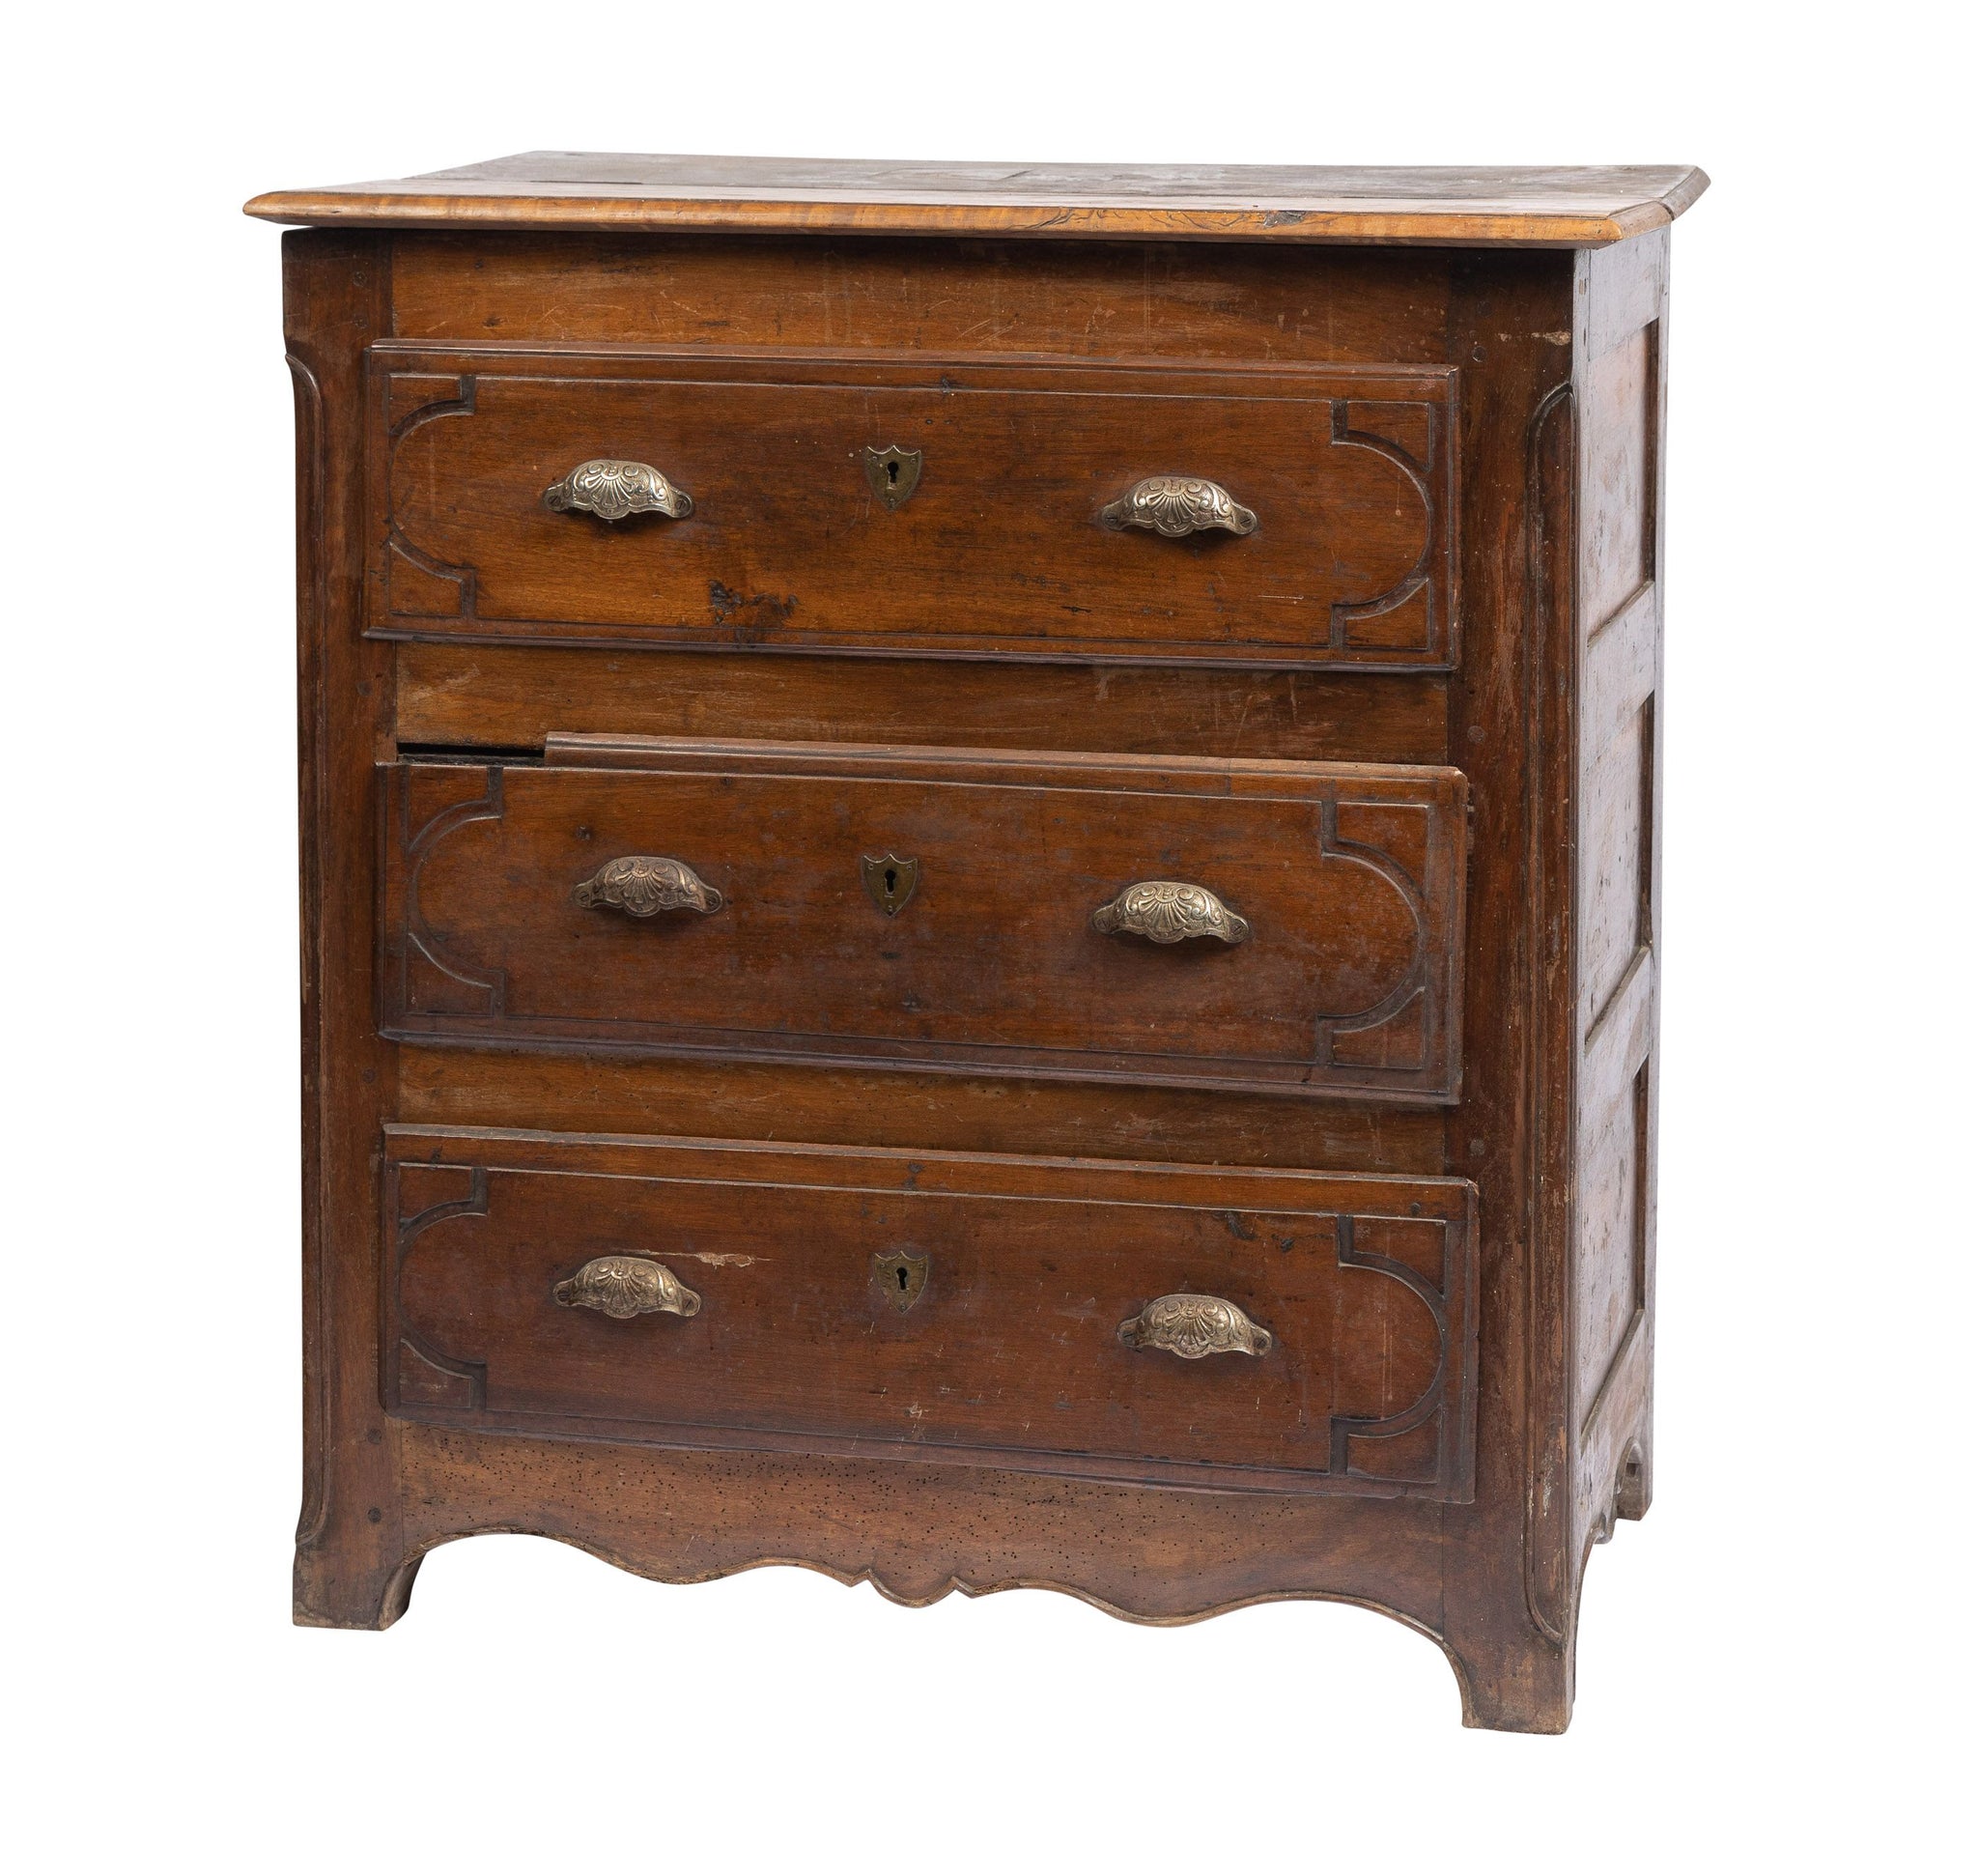 Stunning 19th century antique French walnut chest of drawers with beautiful original hardware